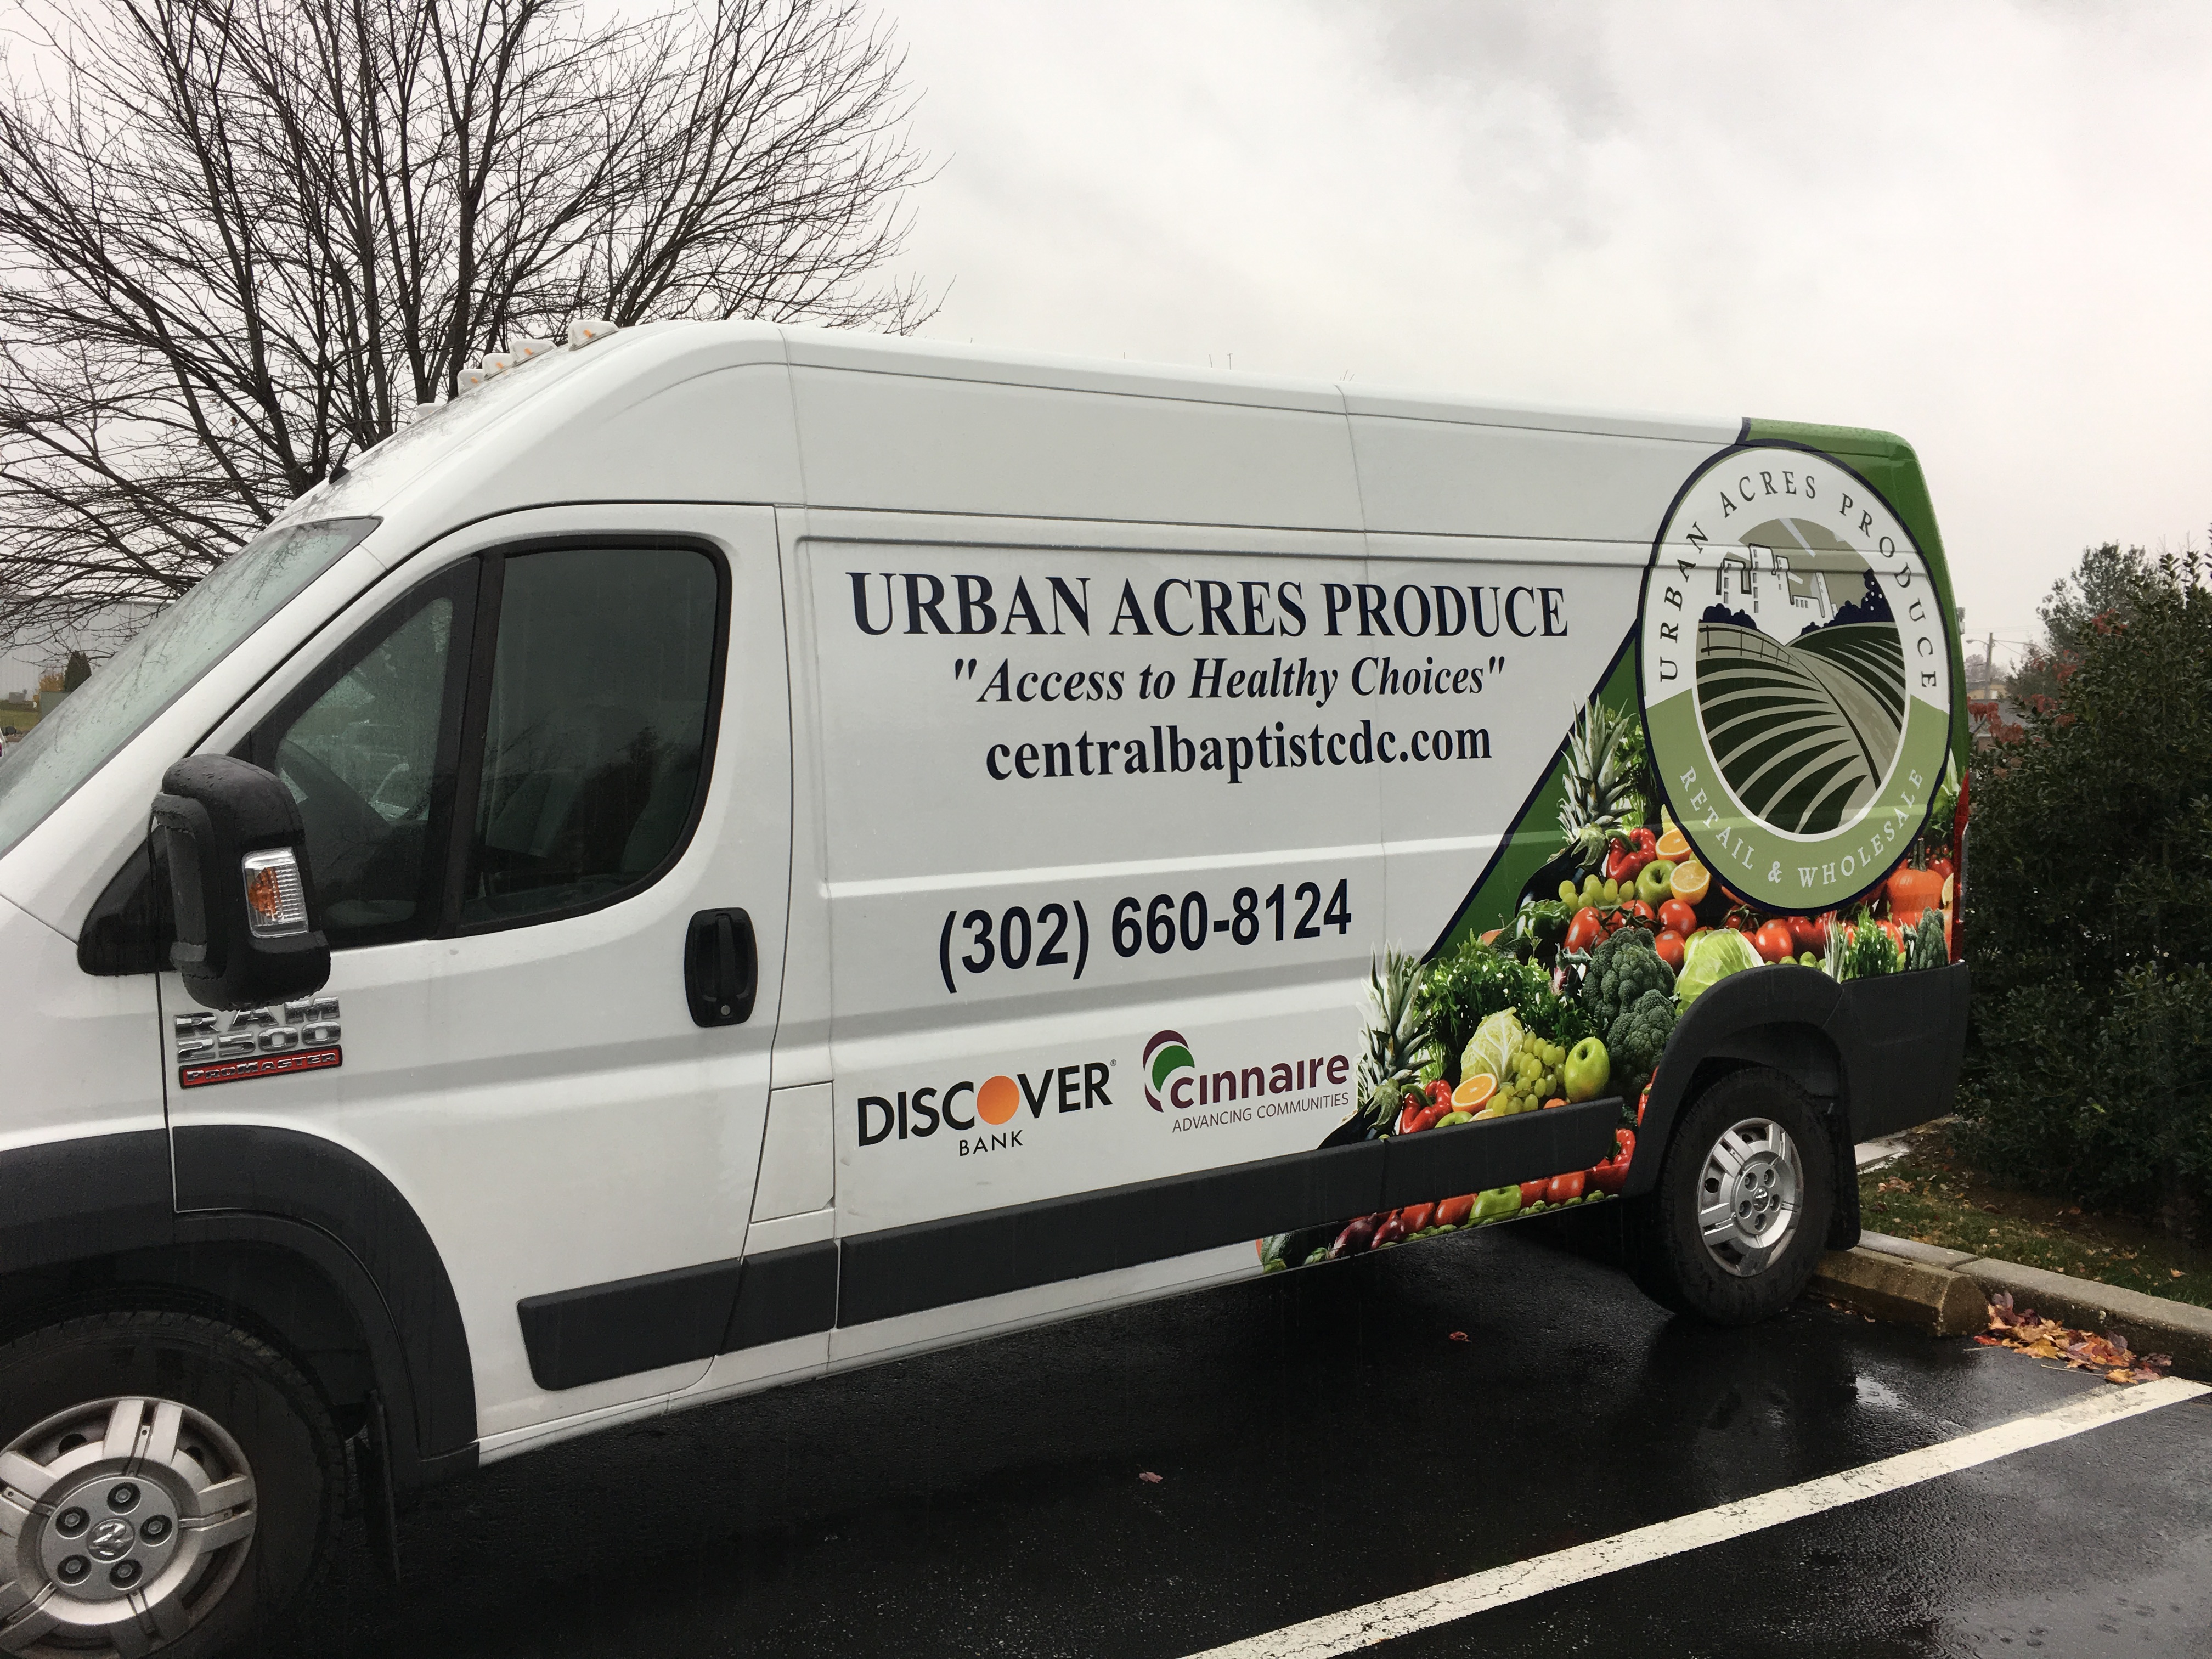 Cinnaire joins Discover Bank and the State of Delaware to support Urban Acres Produce